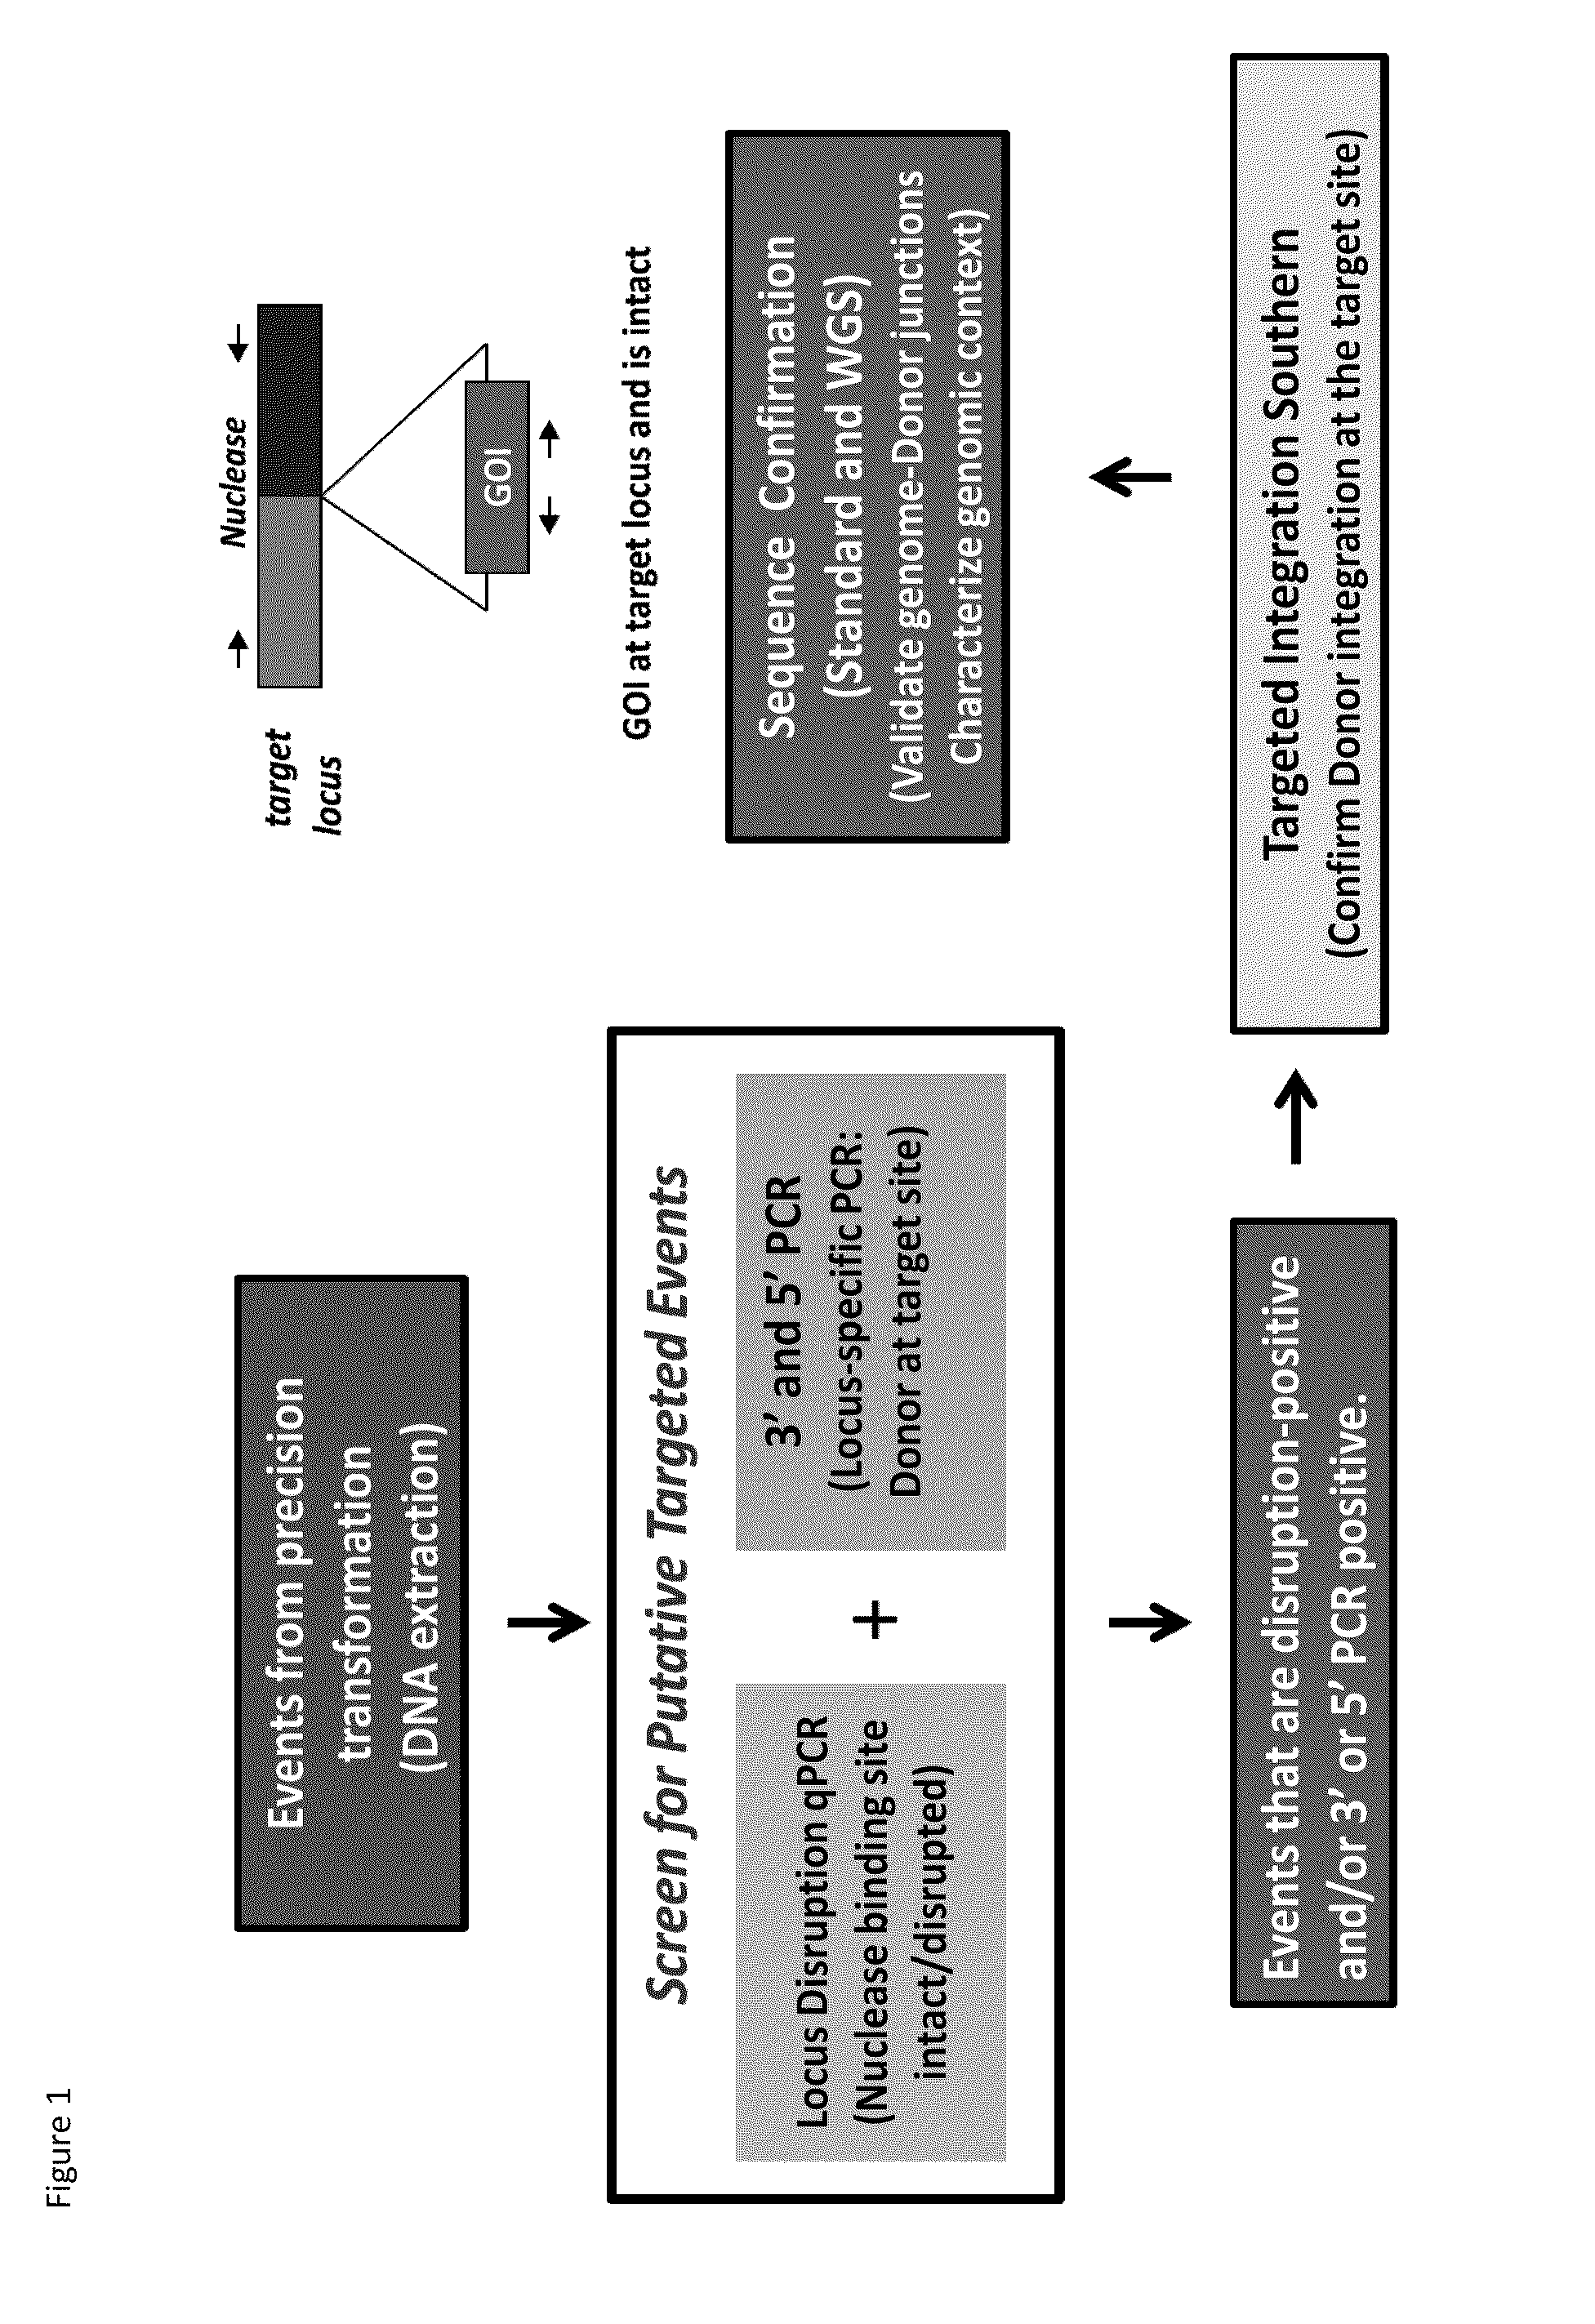 DNA detection methods for site specific nuclease activity